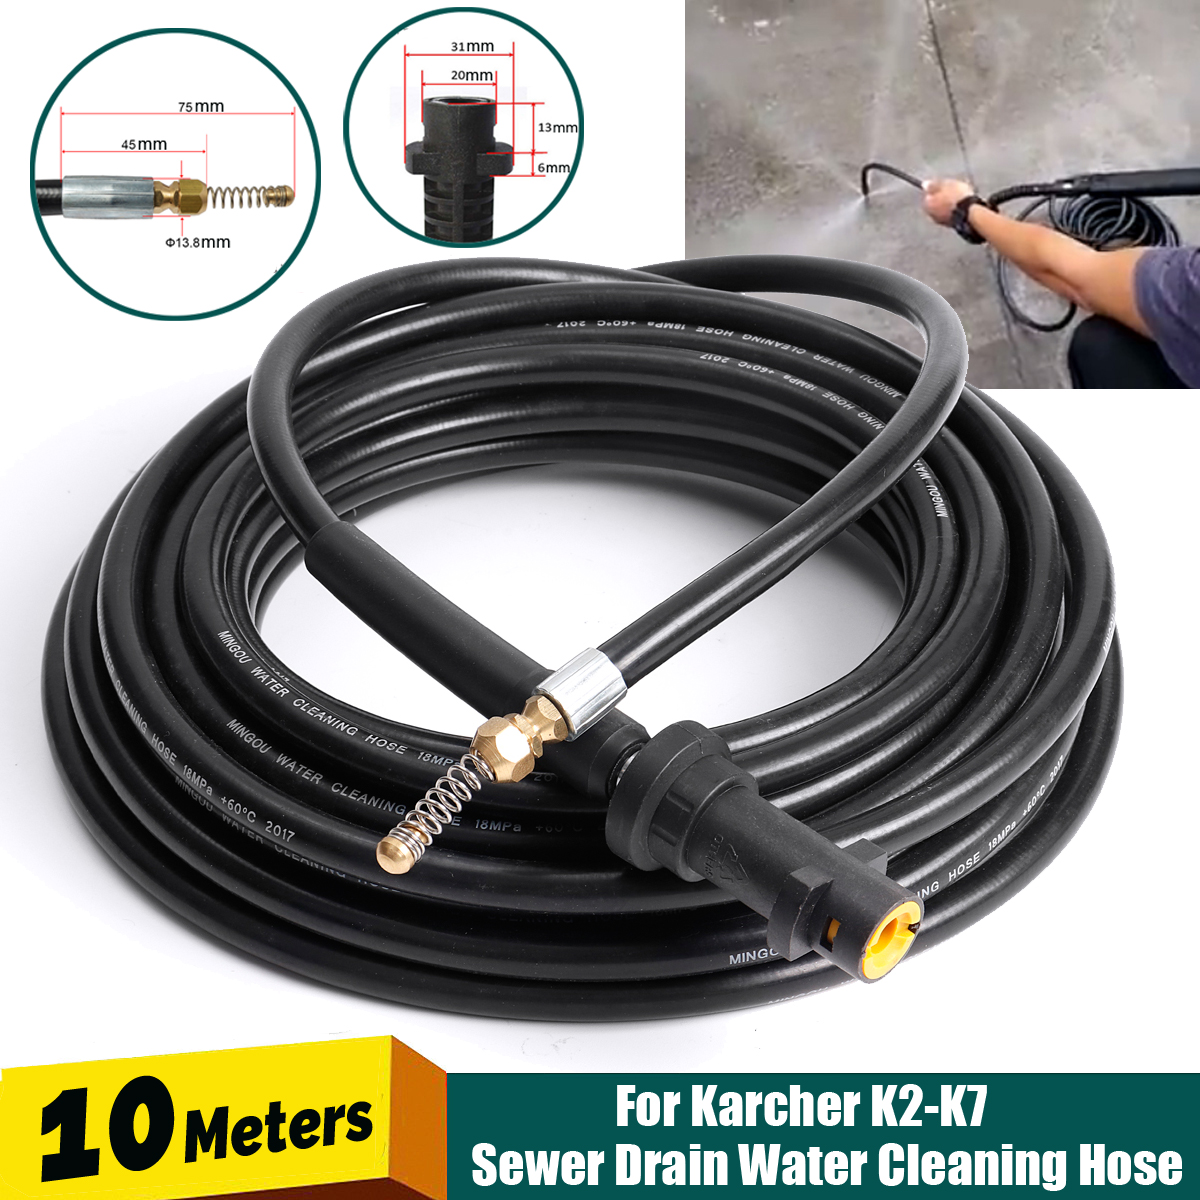 10M-18MPa-Drain-Sewer-Pipe-Cleaning-Hose-Jet-Nozzle-For-Karcher-K2-K7-Pressure-Washer-1463082-2